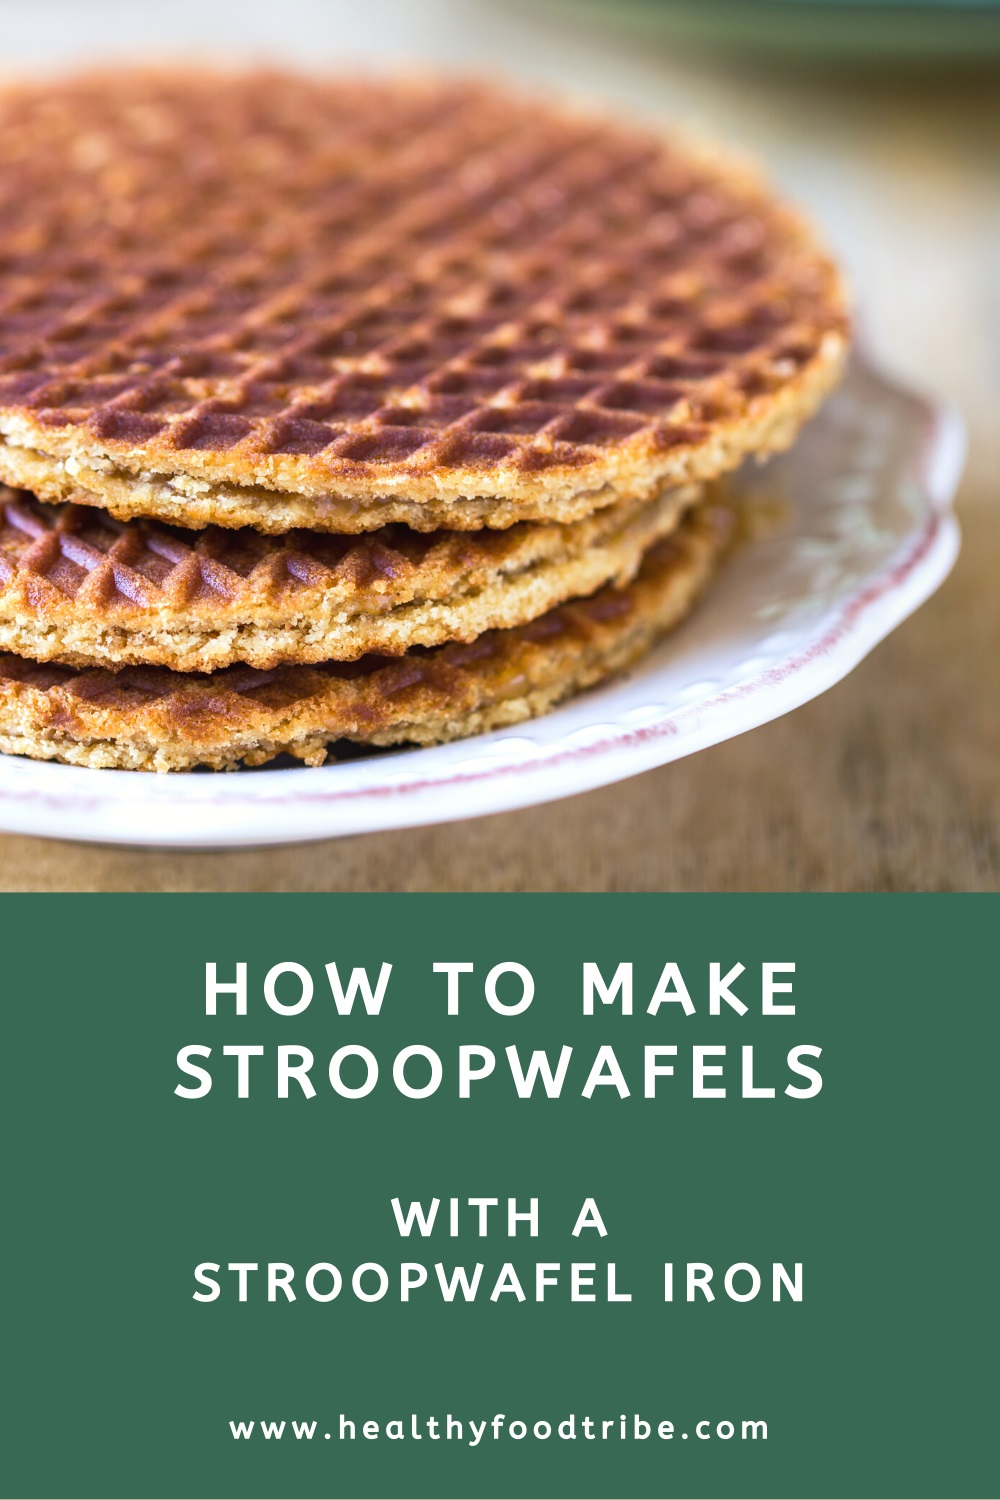 How to make stroopwafels with a stroopwafel iron